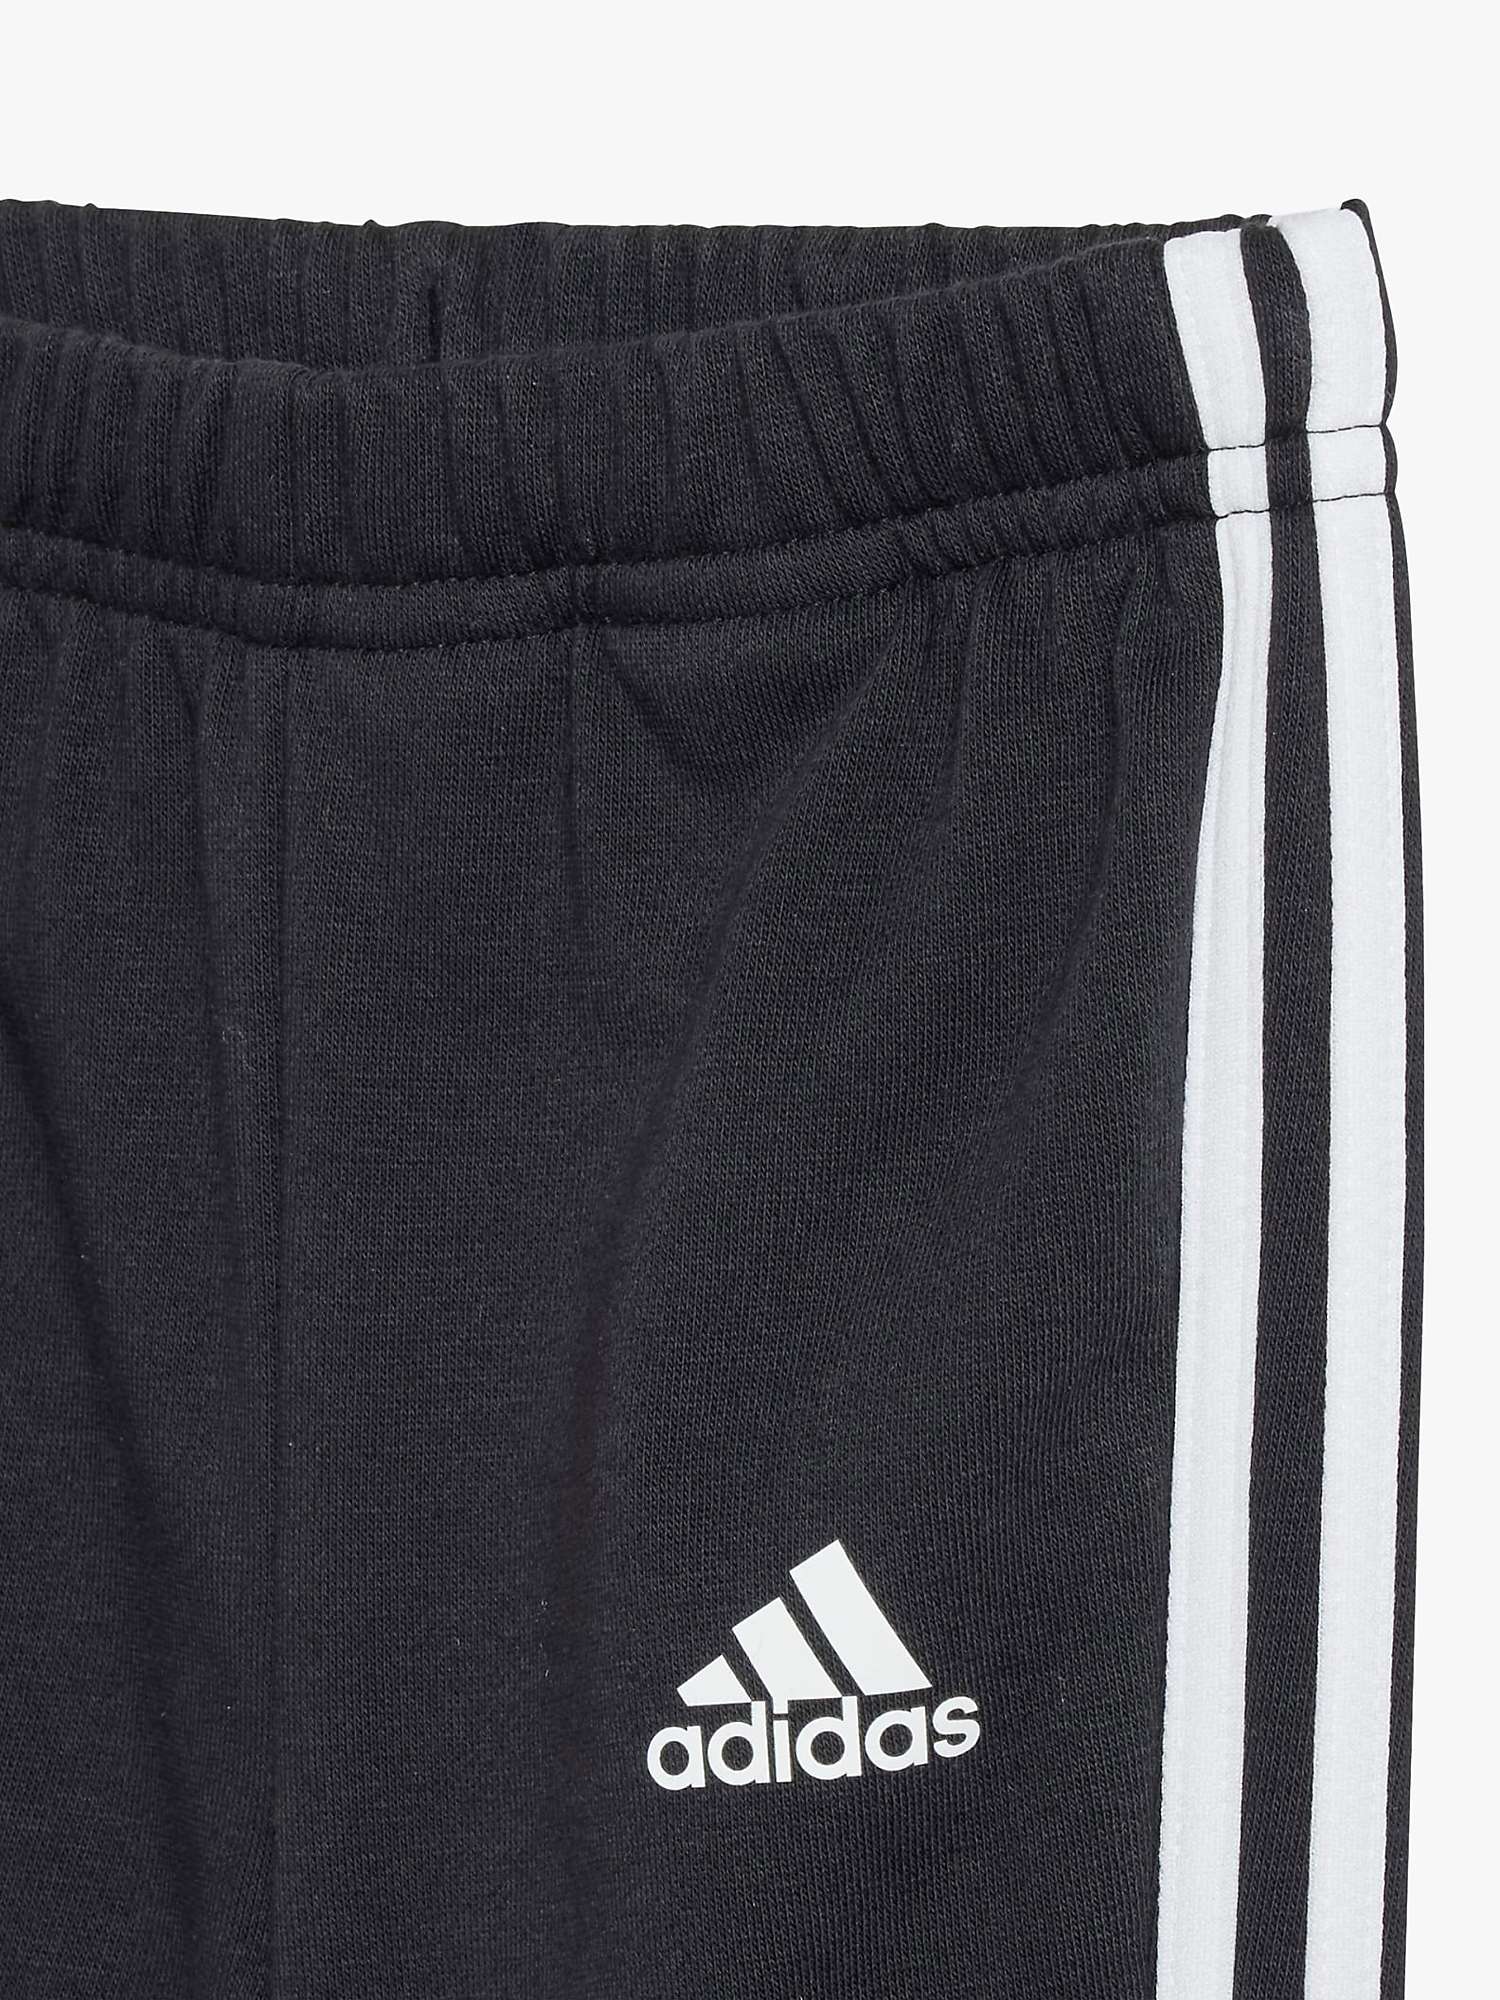 Buy adidas Baby Essentials 3 Stripes Jumper & Joggers Set, Red/White Online at johnlewis.com